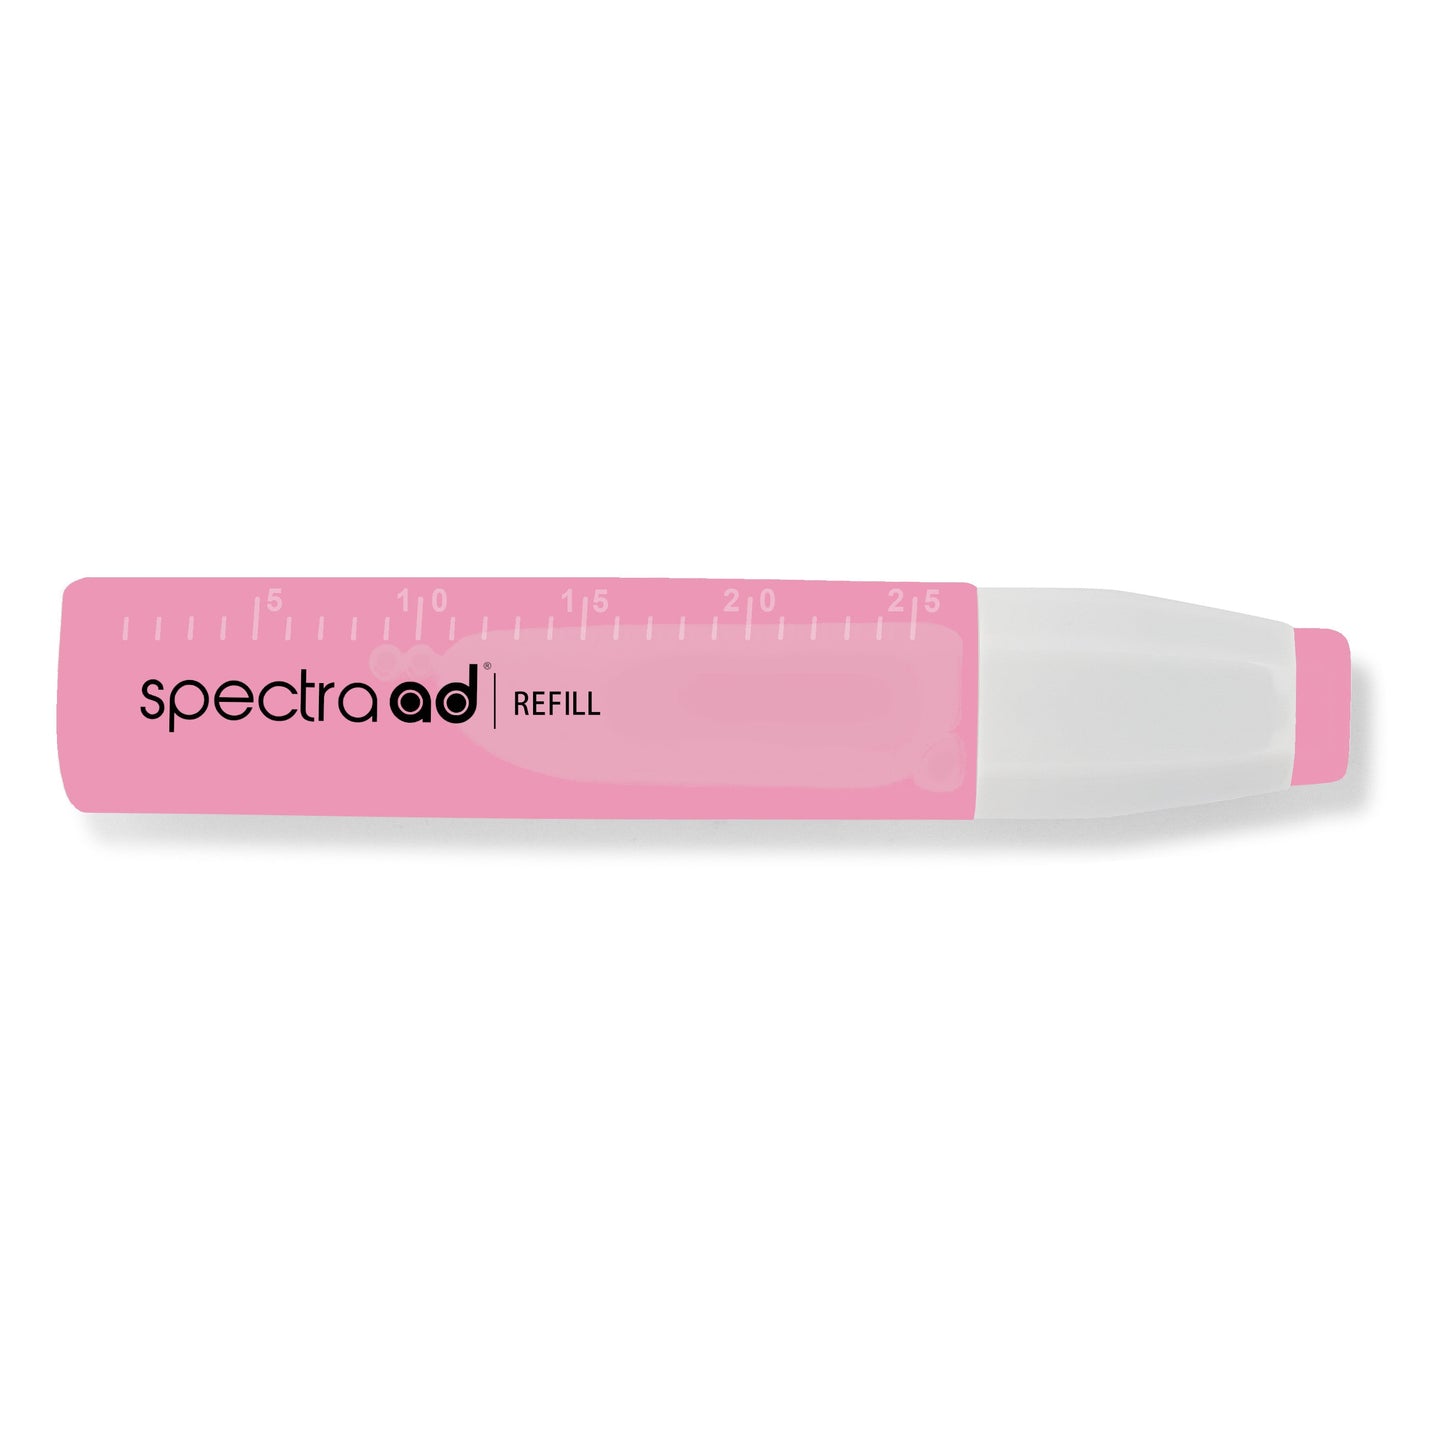 011 - Coral Pink - Spectra AD Refill Bottle